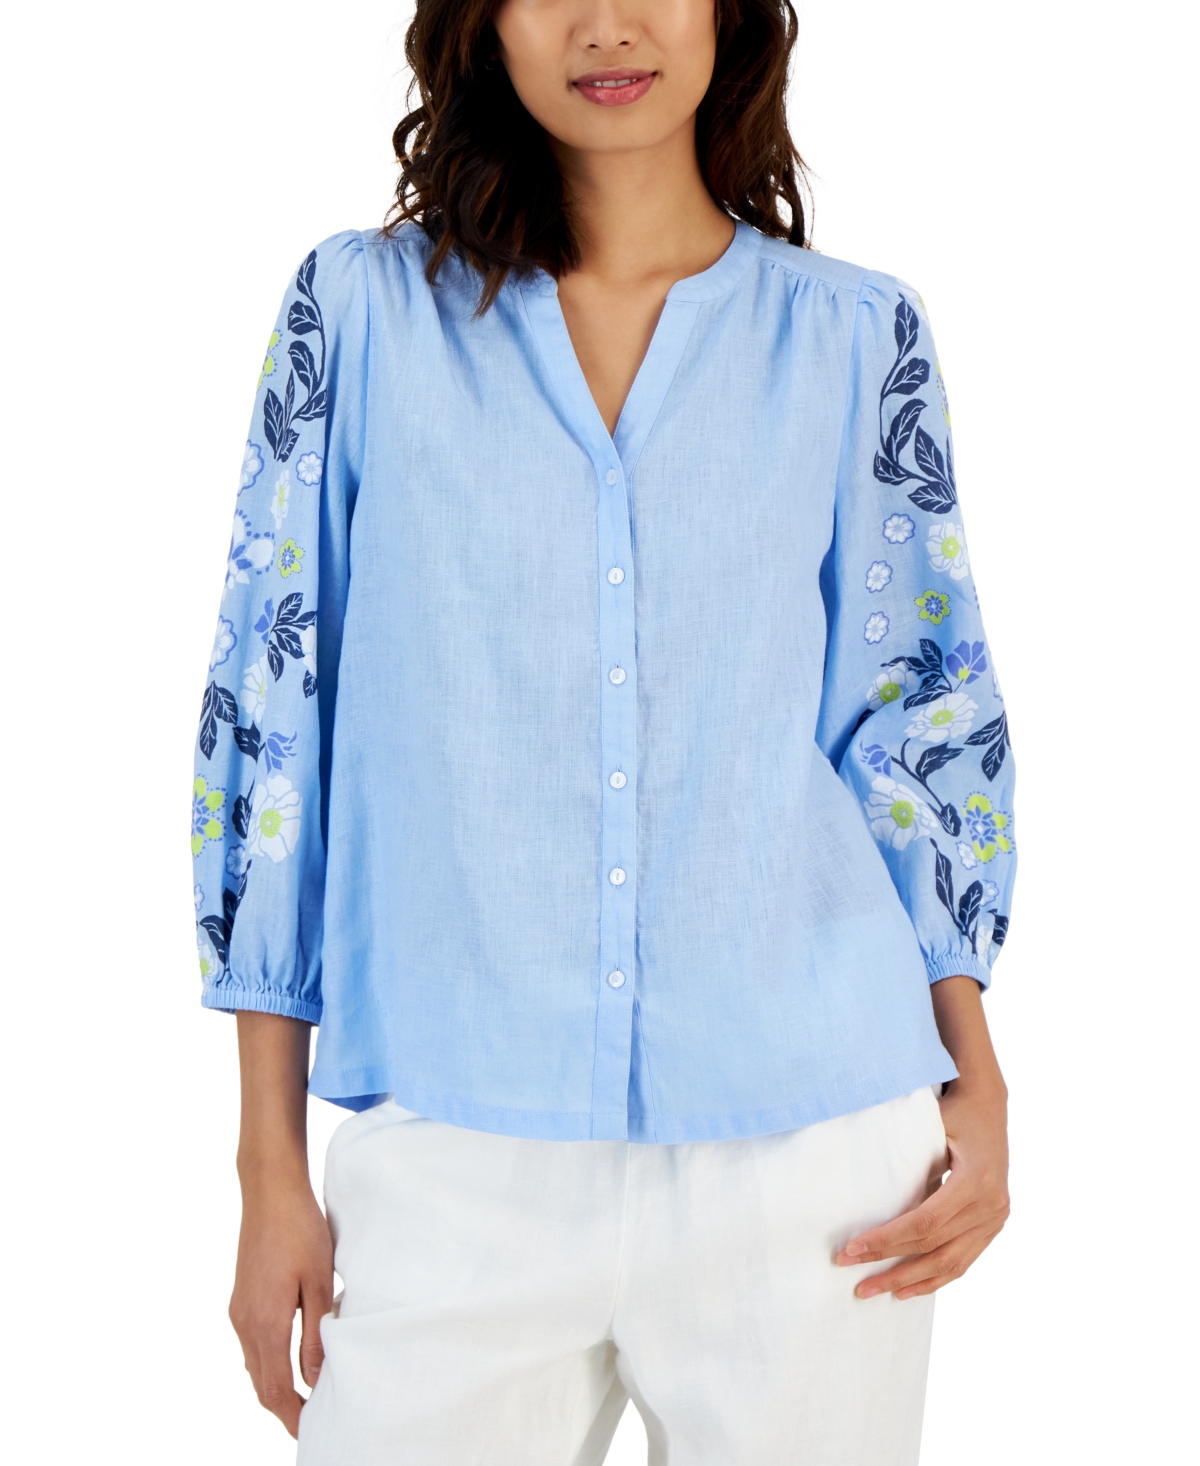 Charter Club Women's Linen Printed Button-Up Top, Created for Macy's